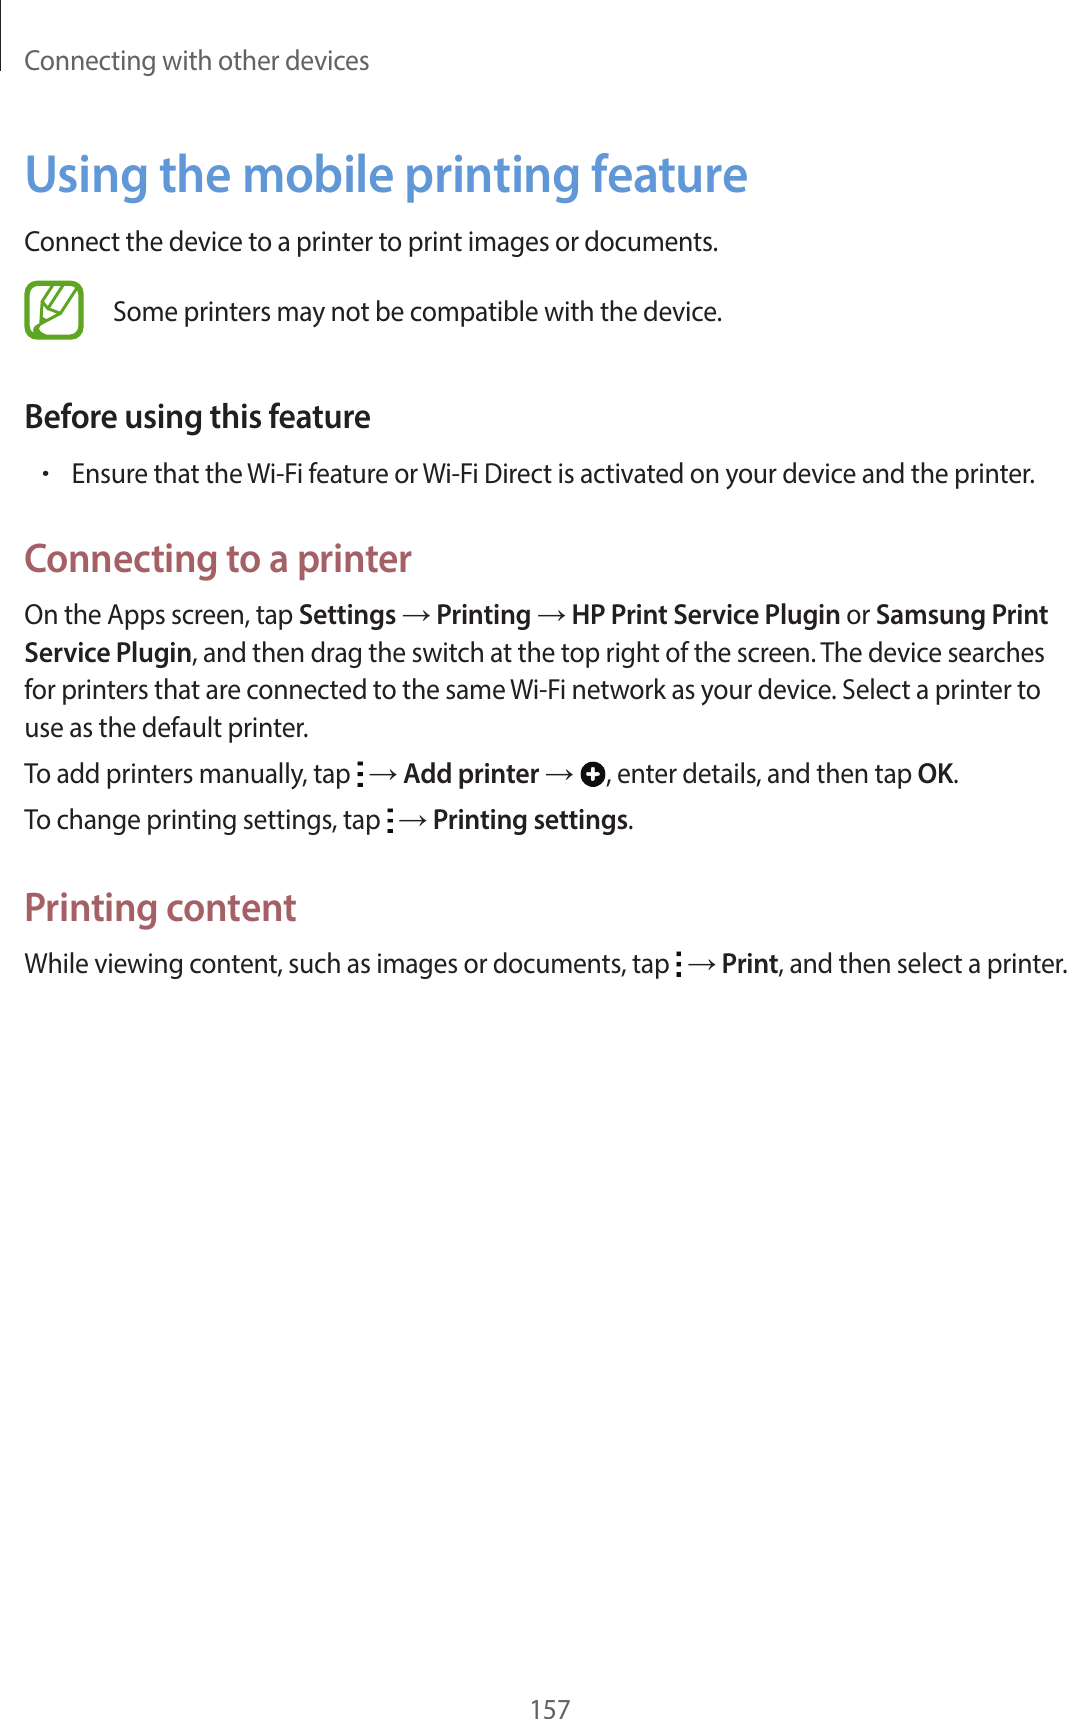 Connecting with other devices157Using the mobile printing featureConnect the device to a printer to print images or documents.Some printers may not be compatible with the device.Before using this feature•Ensure that the Wi-Fi feature or Wi-Fi Direct is activated on your device and the printer.Connecting to a printerOn the Apps screen, tap Settings → Printing → HP Print Service Plugin or Samsung Print Service Plugin, and then drag the switch at the top right of the screen. The device searches for printers that are connected to the same Wi-Fi network as your device. Select a printer to use as the default printer.To add printers manually, tap   → Add printer → , enter details, and then tap OK.To change printing settings, tap   → Printing settings.Printing contentWhile viewing content, such as images or documents, tap   → Print, and then select a printer.